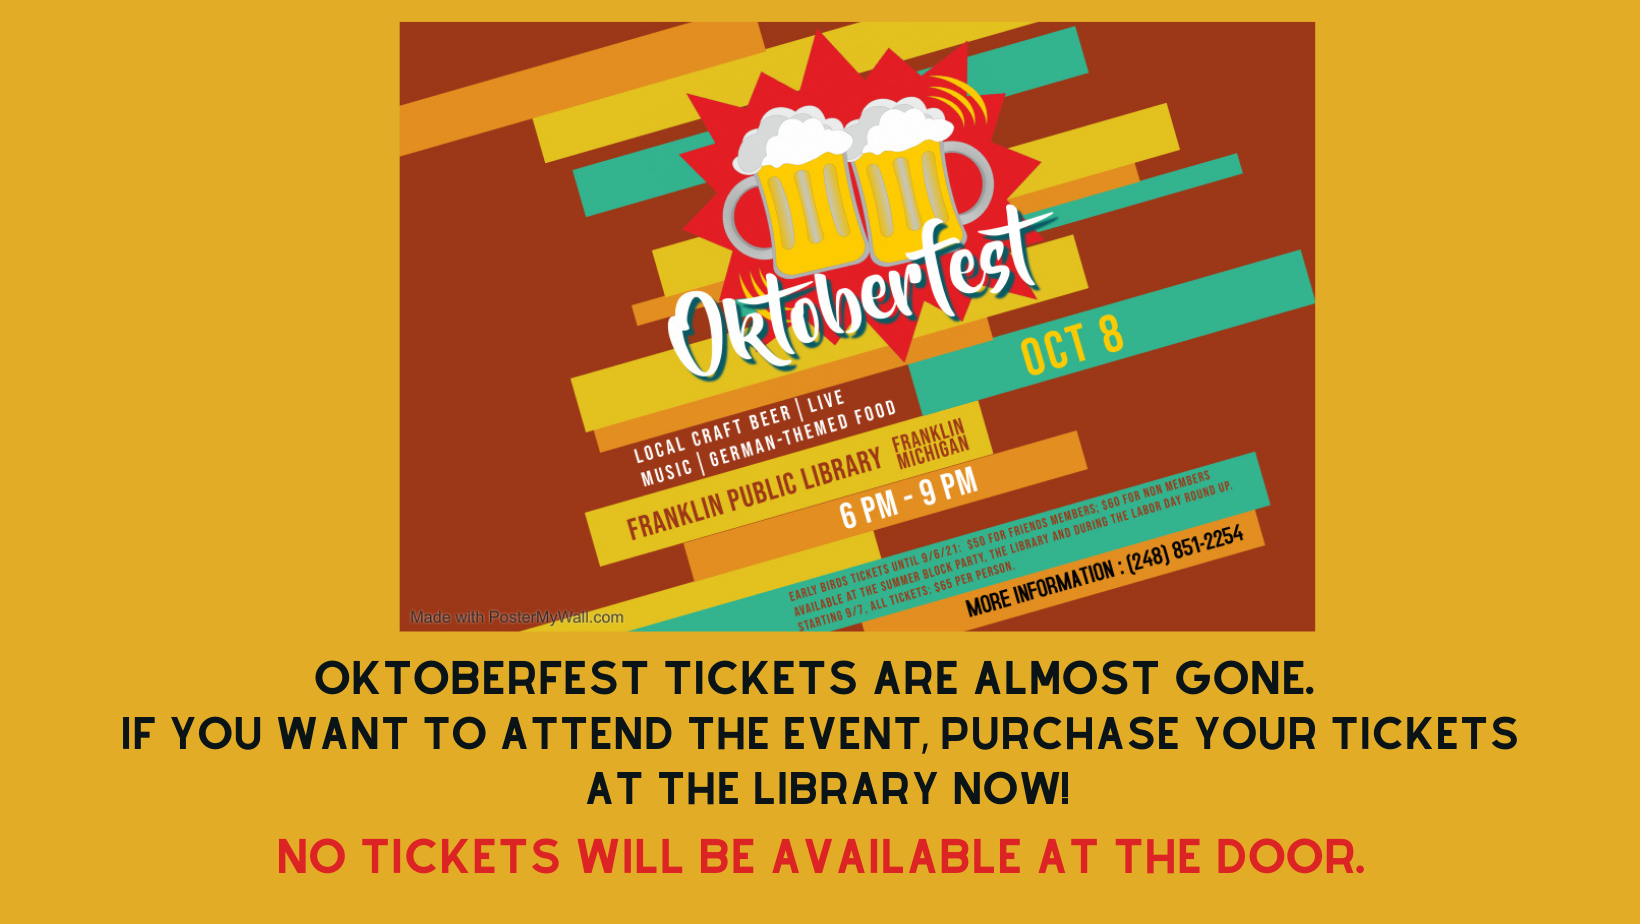 CAROUSEL Oktoberfest tickets almost gone.png